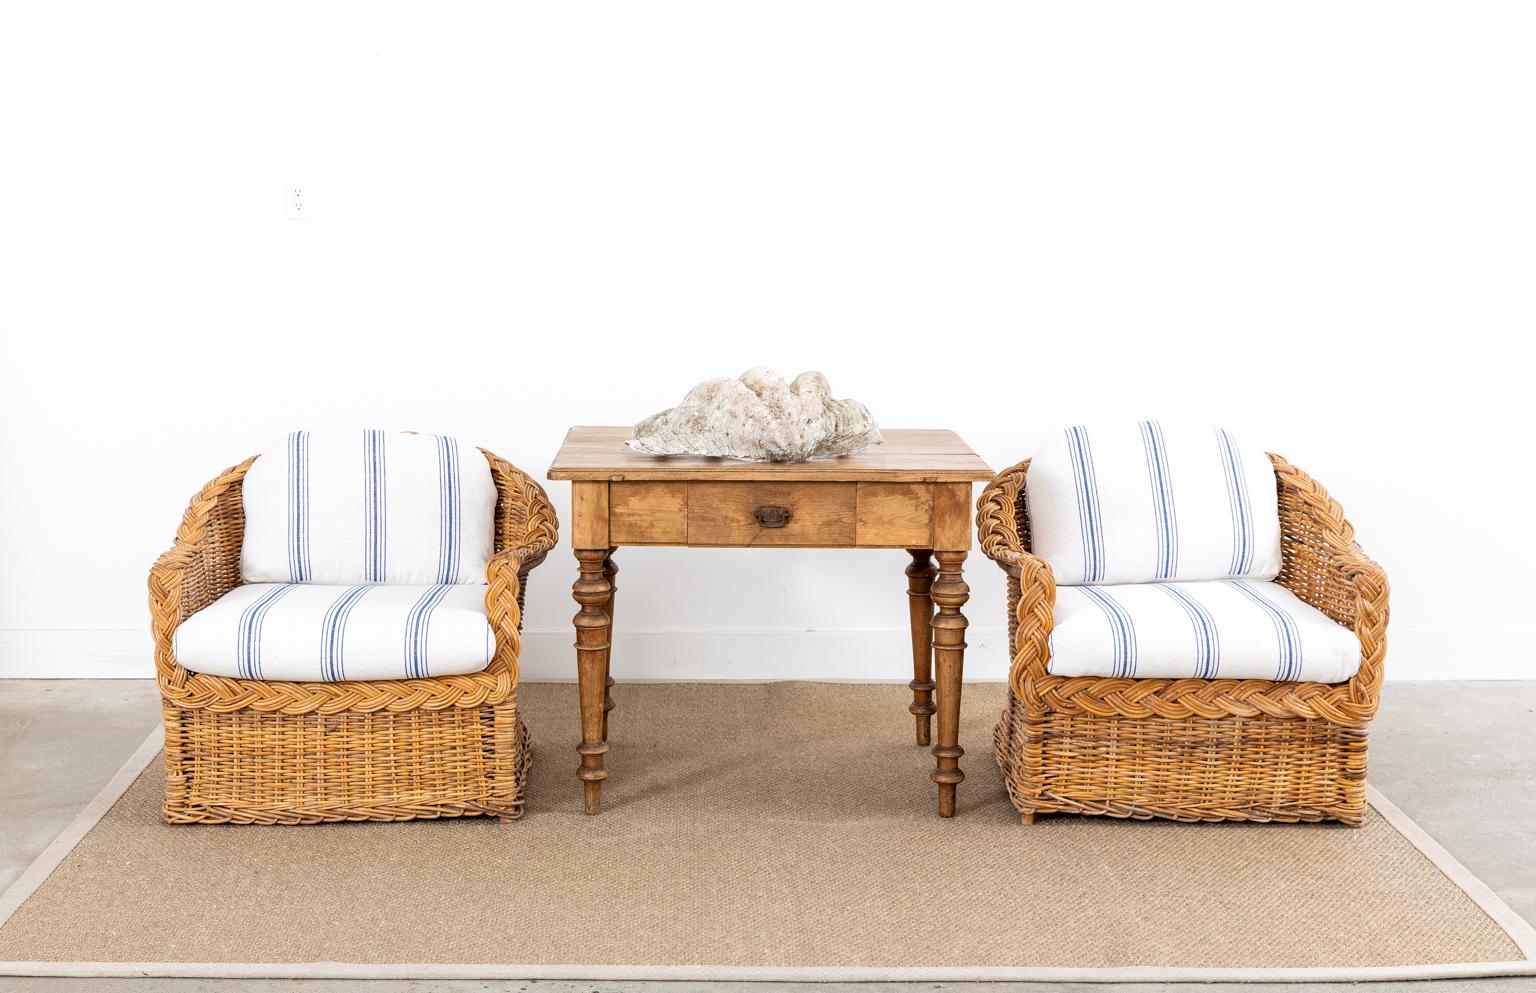 Stylish pair of woven rattan wicker lounge chairs made in the California organic modern style by The Wicker Works in San Francisco, CA. The timeless design features a modern redux of blue and white upholstery. The soft fabric has a French grain sack